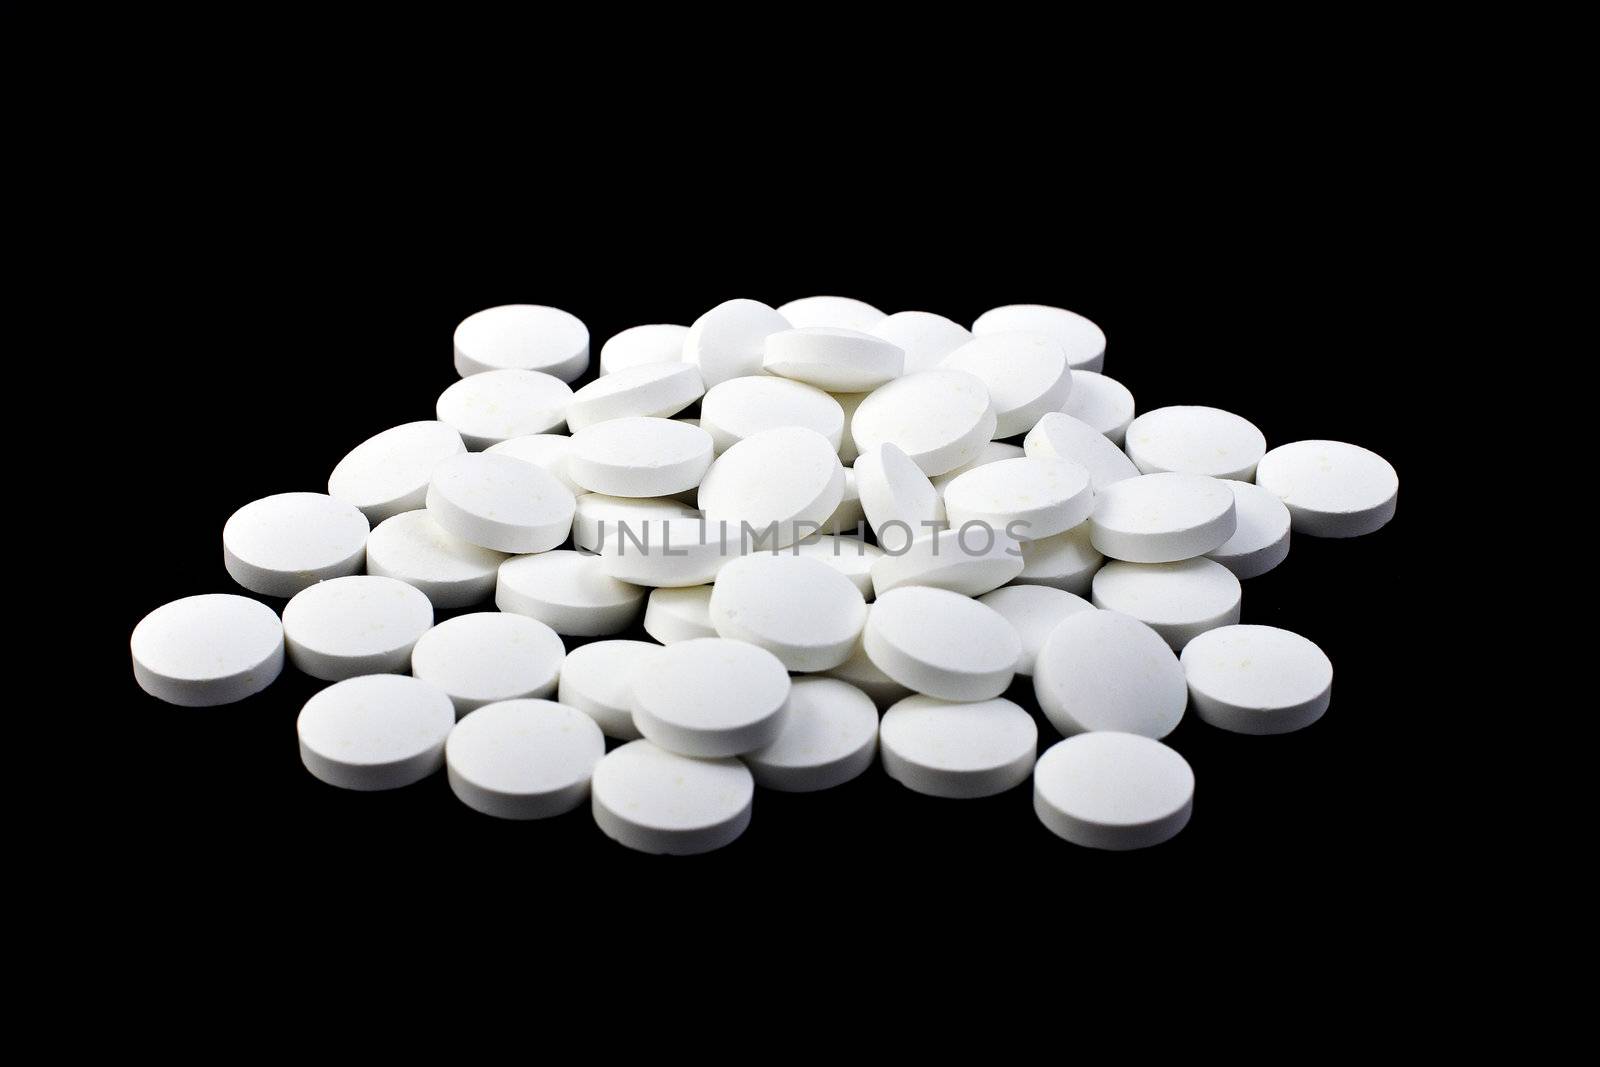 A handful of pills on a black background, isolated